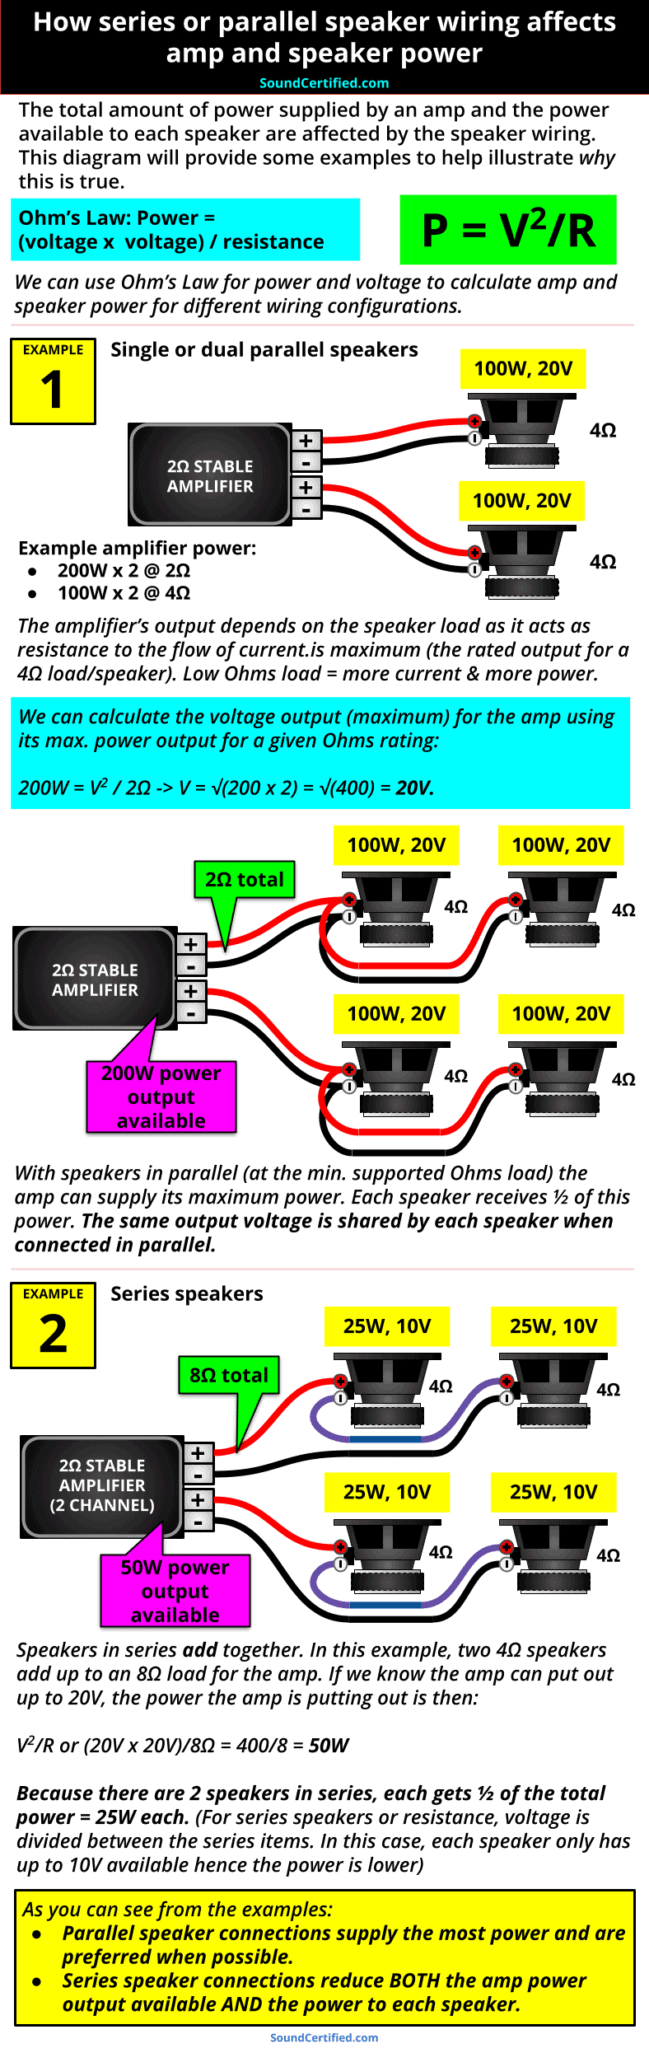 What’s The Best Way To Hook Up An Amp And Subs? (Master Guide + Diagrams)